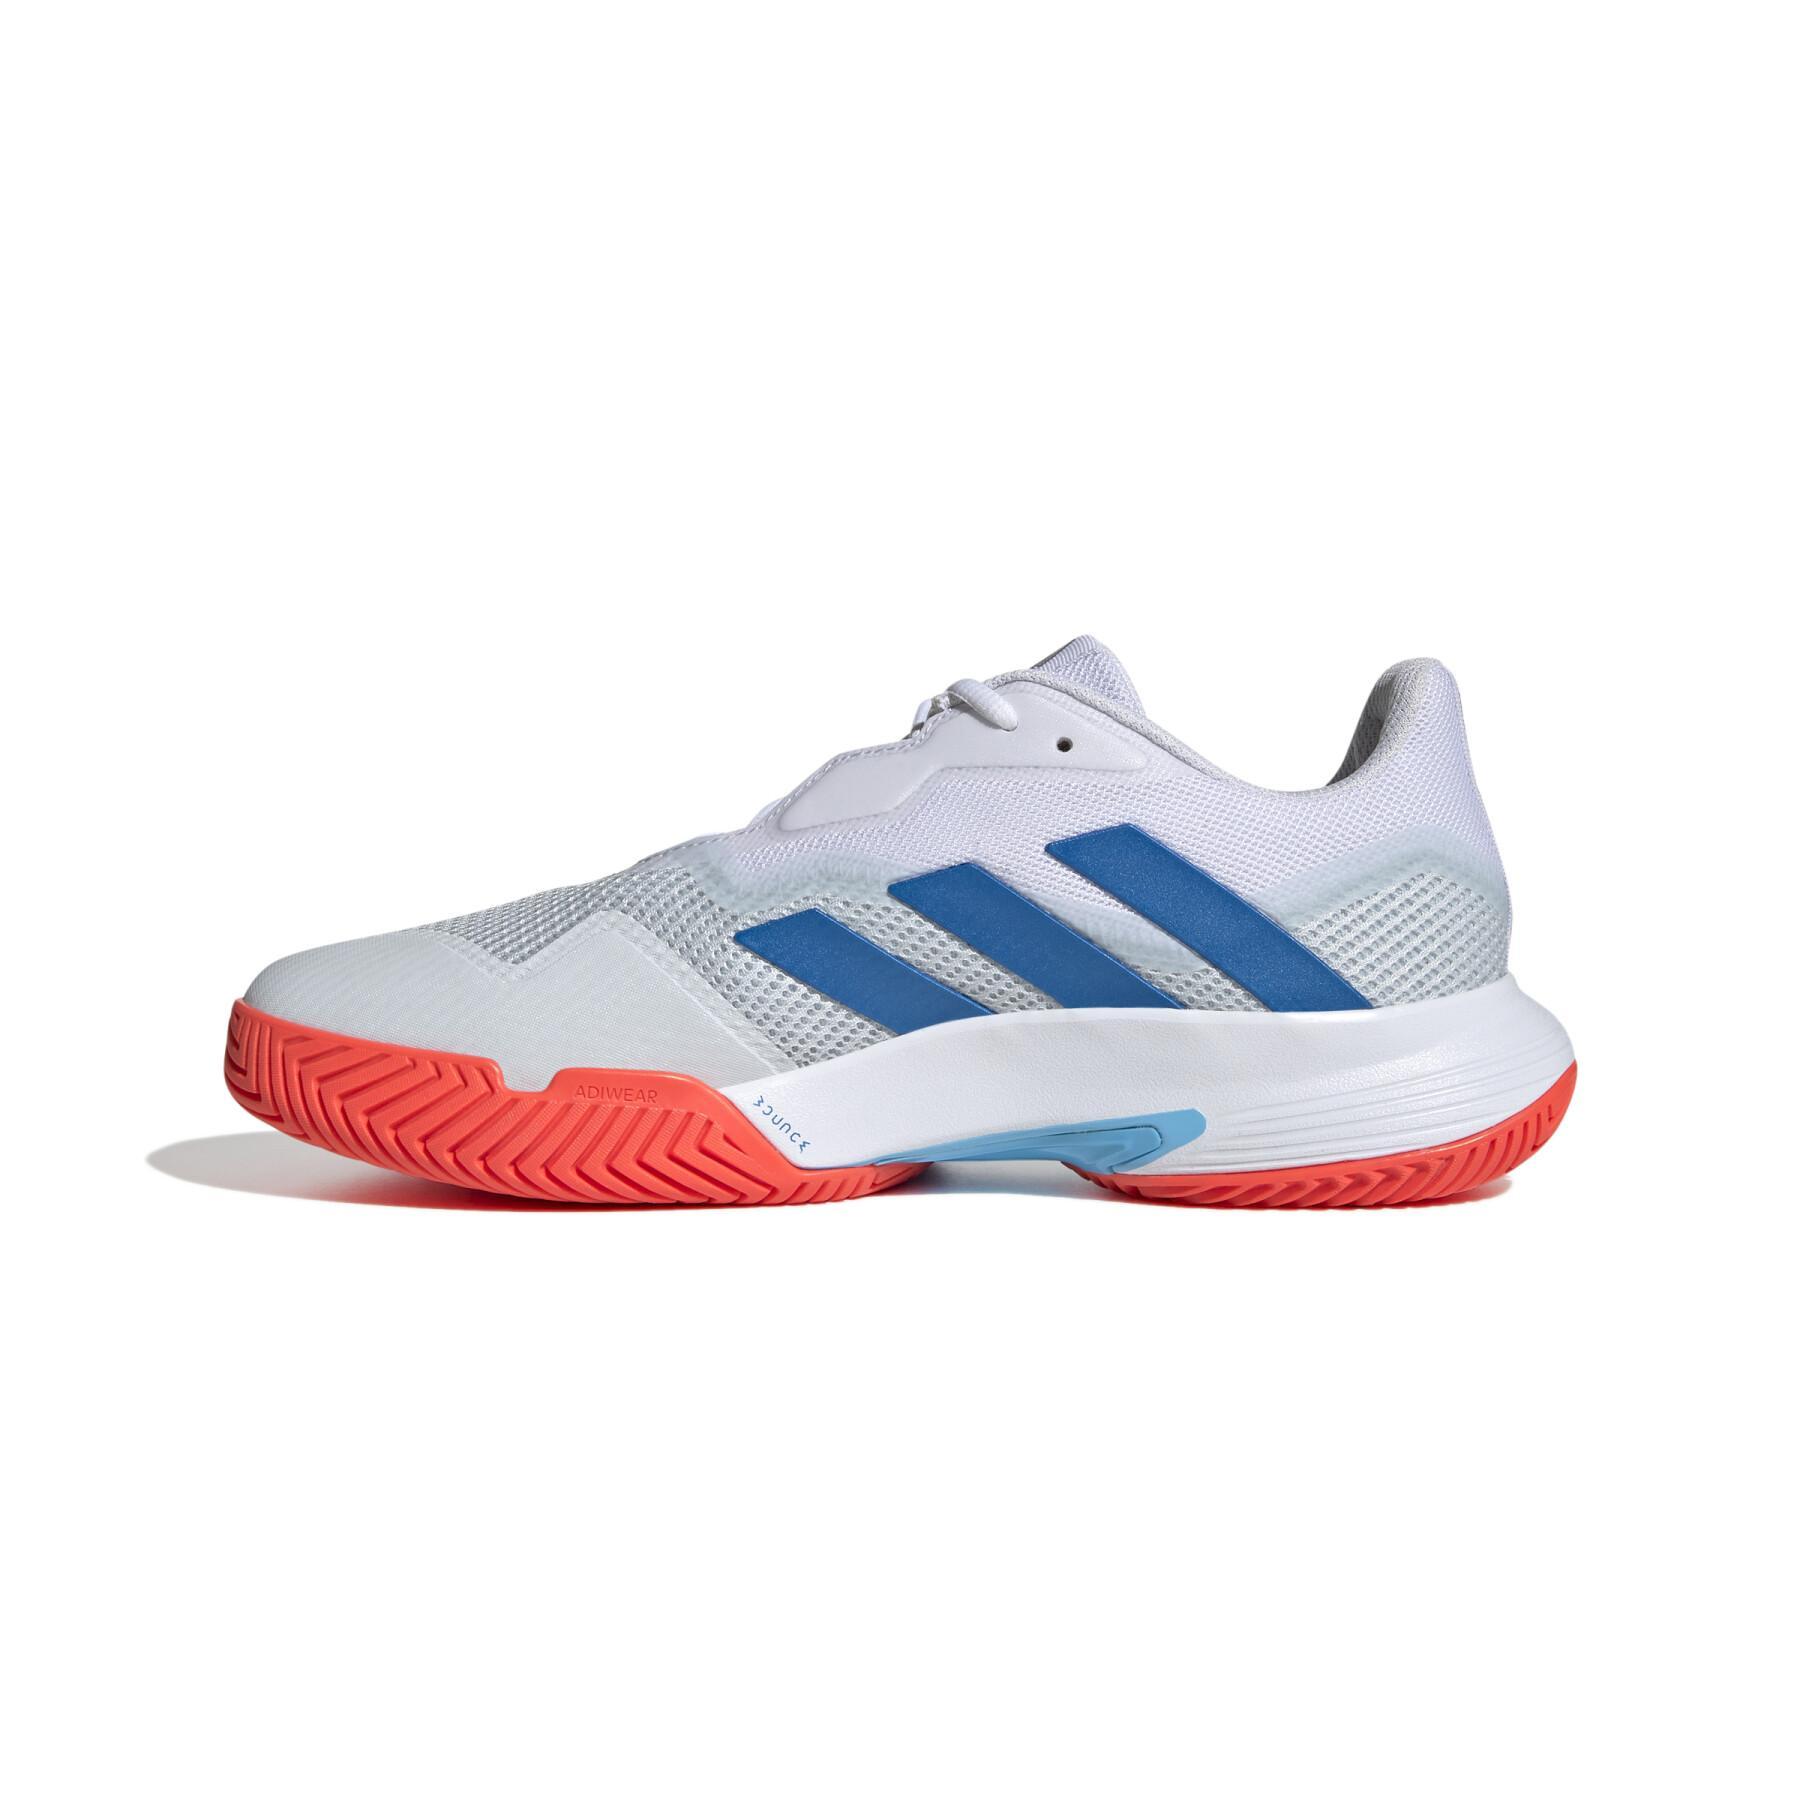 Chaussures adidas Courtjam Control Tennis